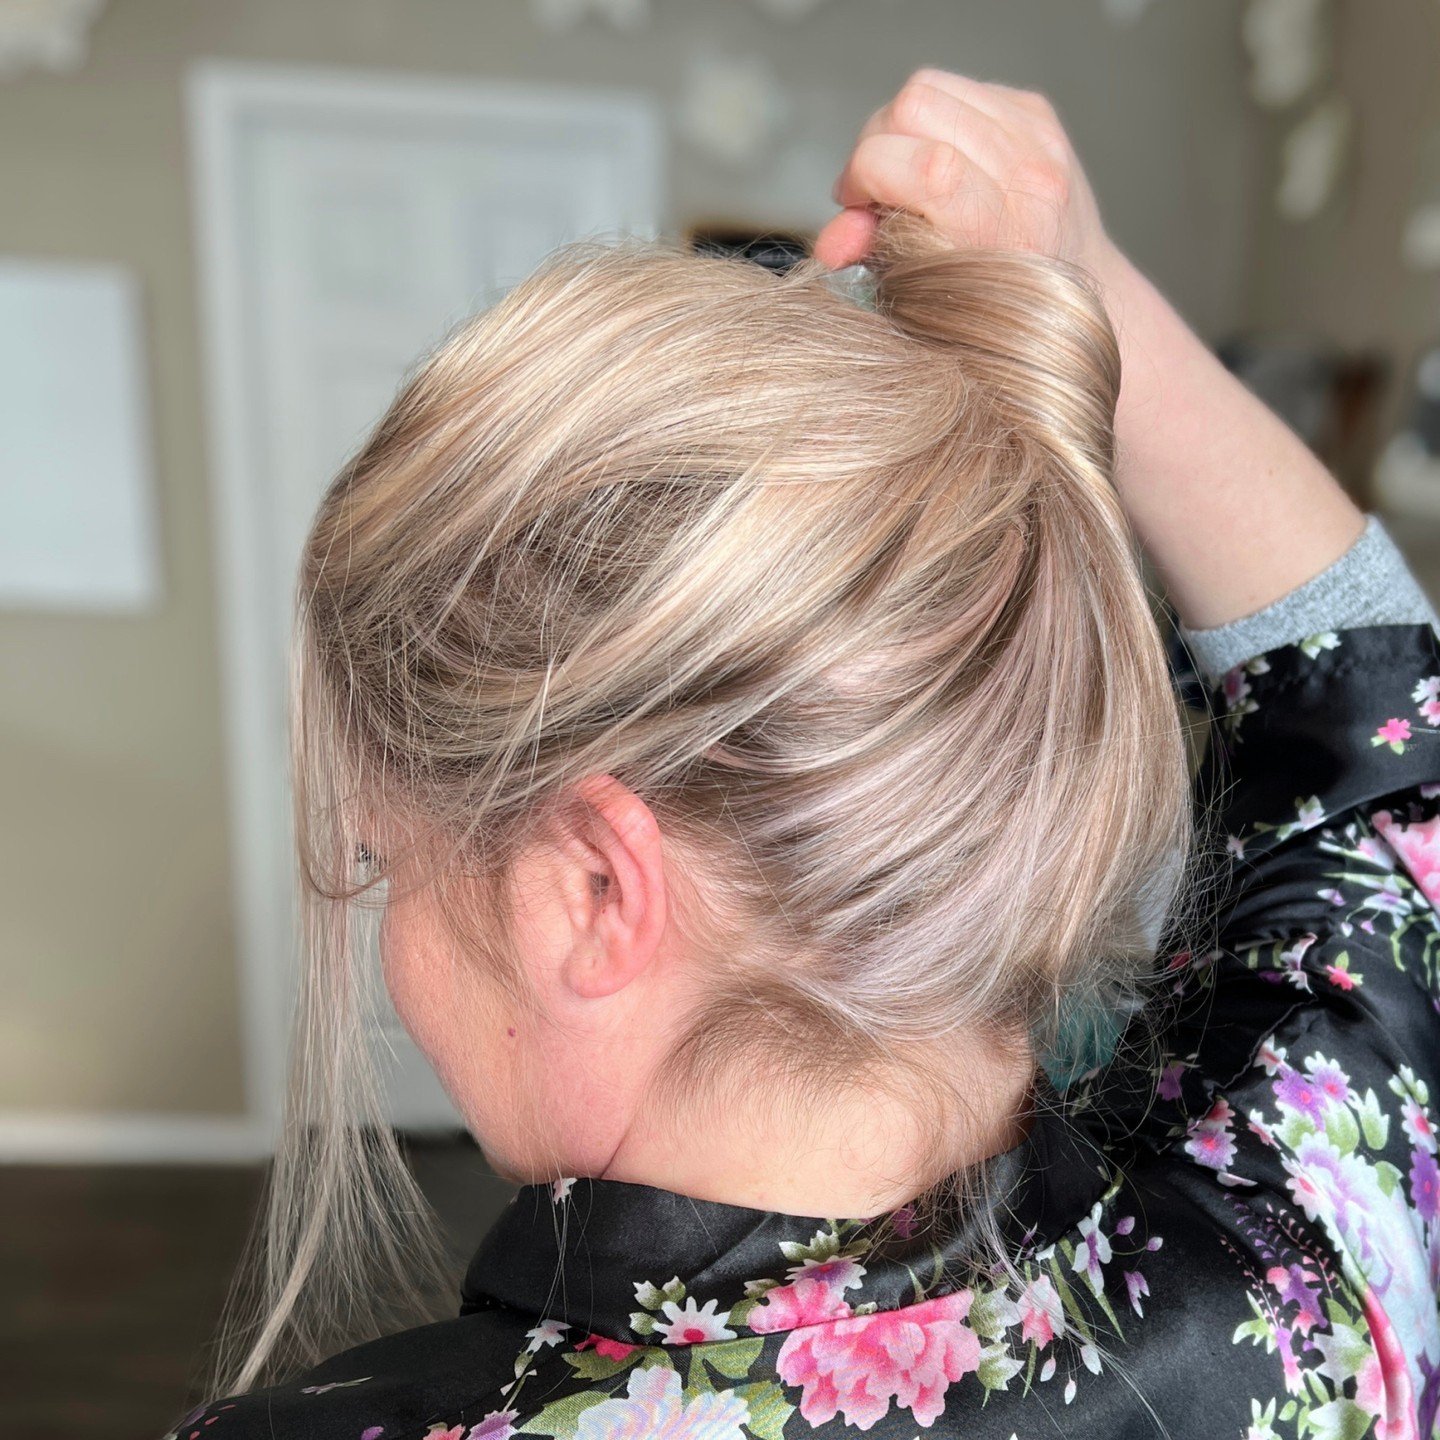 If you love regularly wearing half styles, buns, pony&rsquo;s, &amp; updos, consider a Global Highlight for your next color appointment!

With lighter strands seamlessly blended throughout your entire head, this service ensures maximum brightness &am